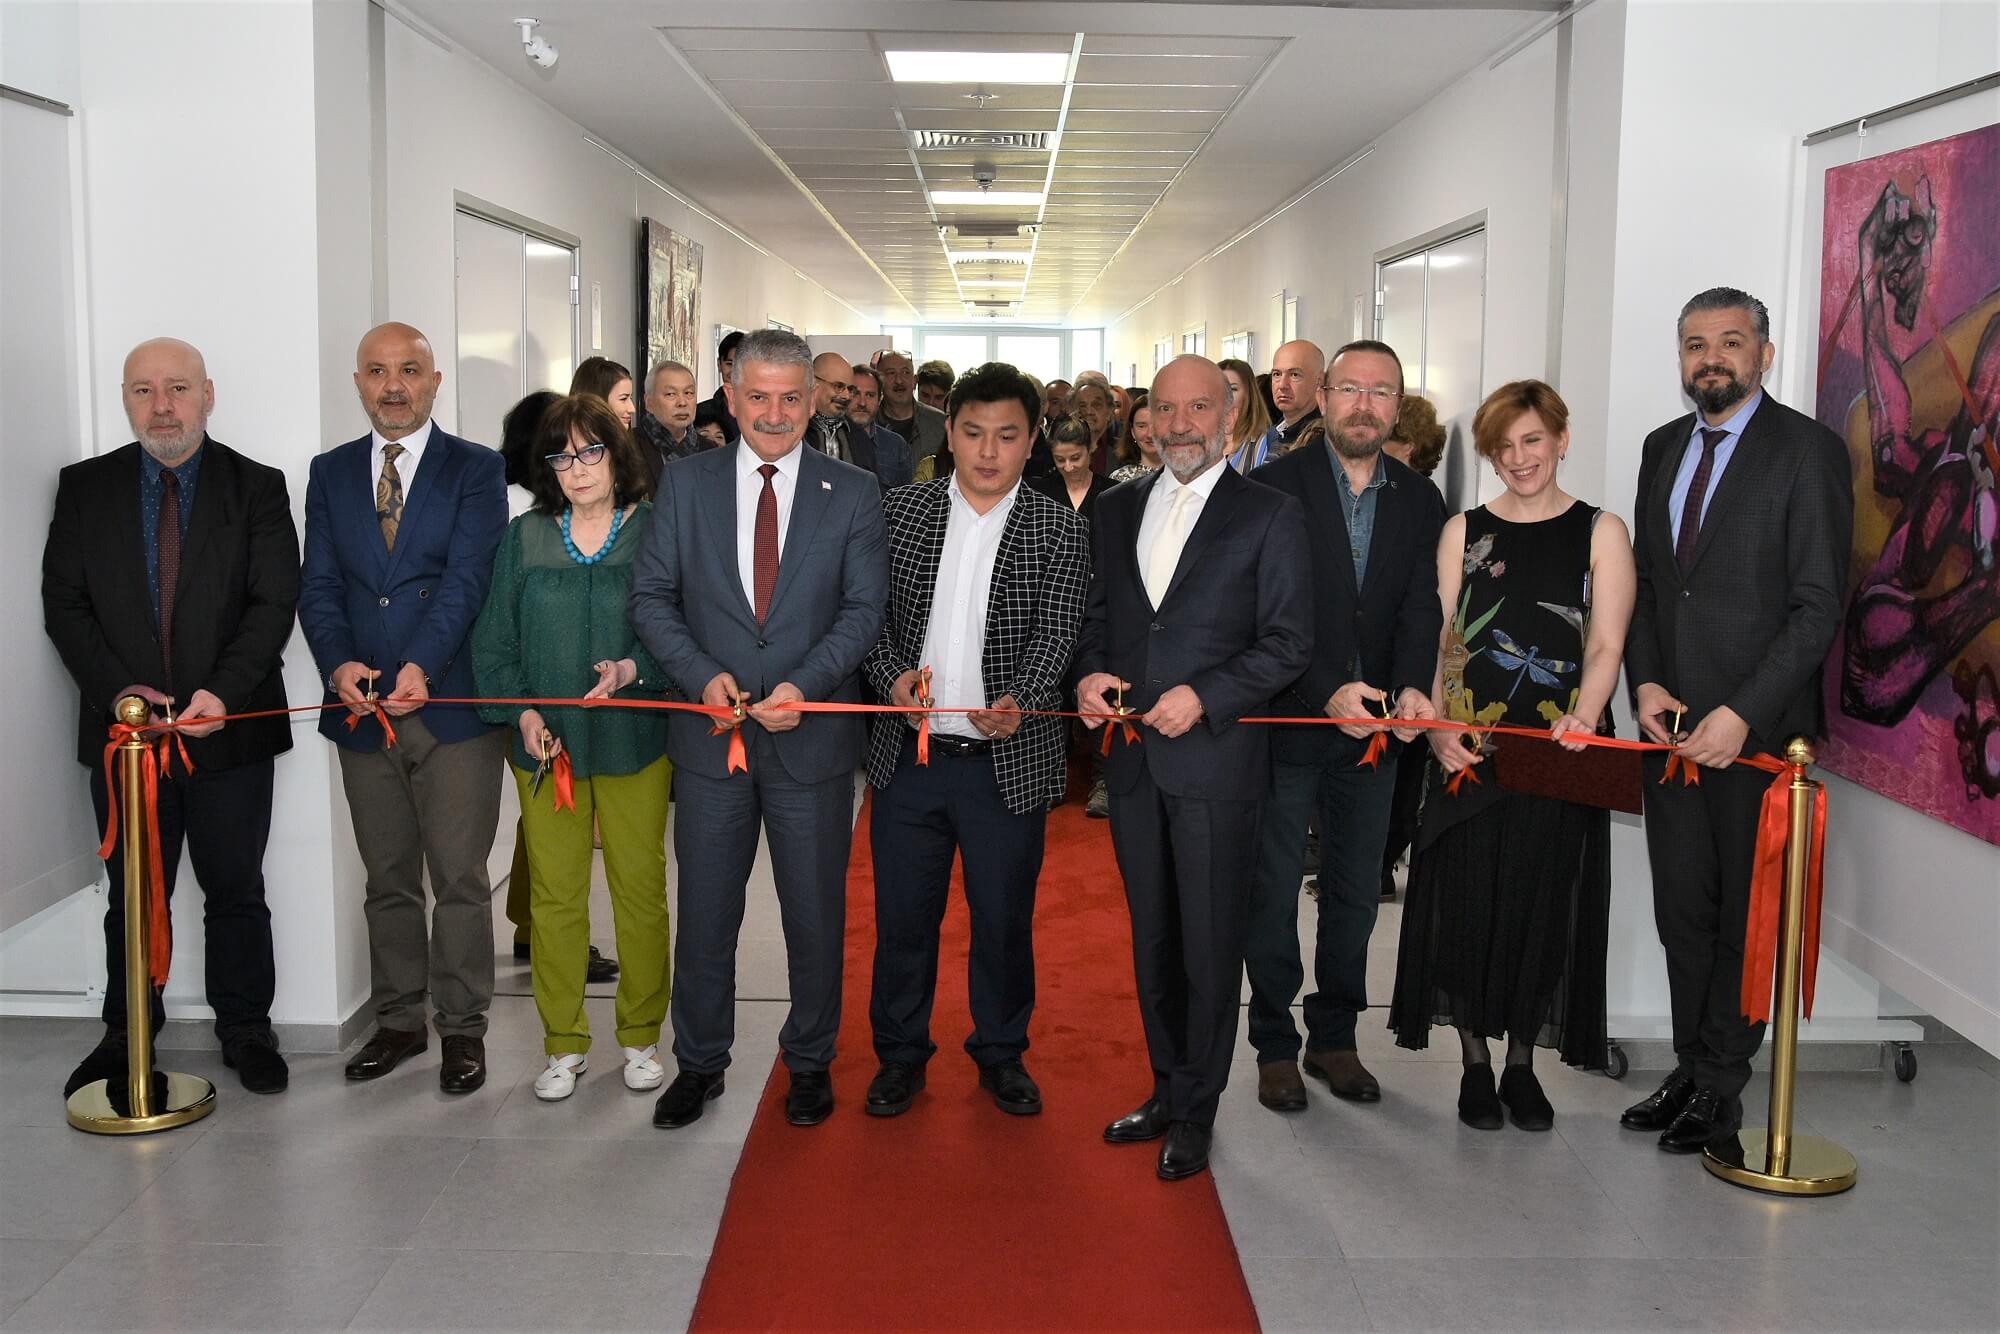 Solo Exhibition titled “Games of Consciousness” consisting of 20 Artworks of Kazakh Artists Alisher Zhurgenov and Nina Tereschenko’s Solo Exhibition titled “Three Colors” consisting of 19 Artworks opened by Former Deputy Prime Minister and Minister of Economy, Tourism, Culture and Sports, and Güzelyurt MP Menteş Gündüz